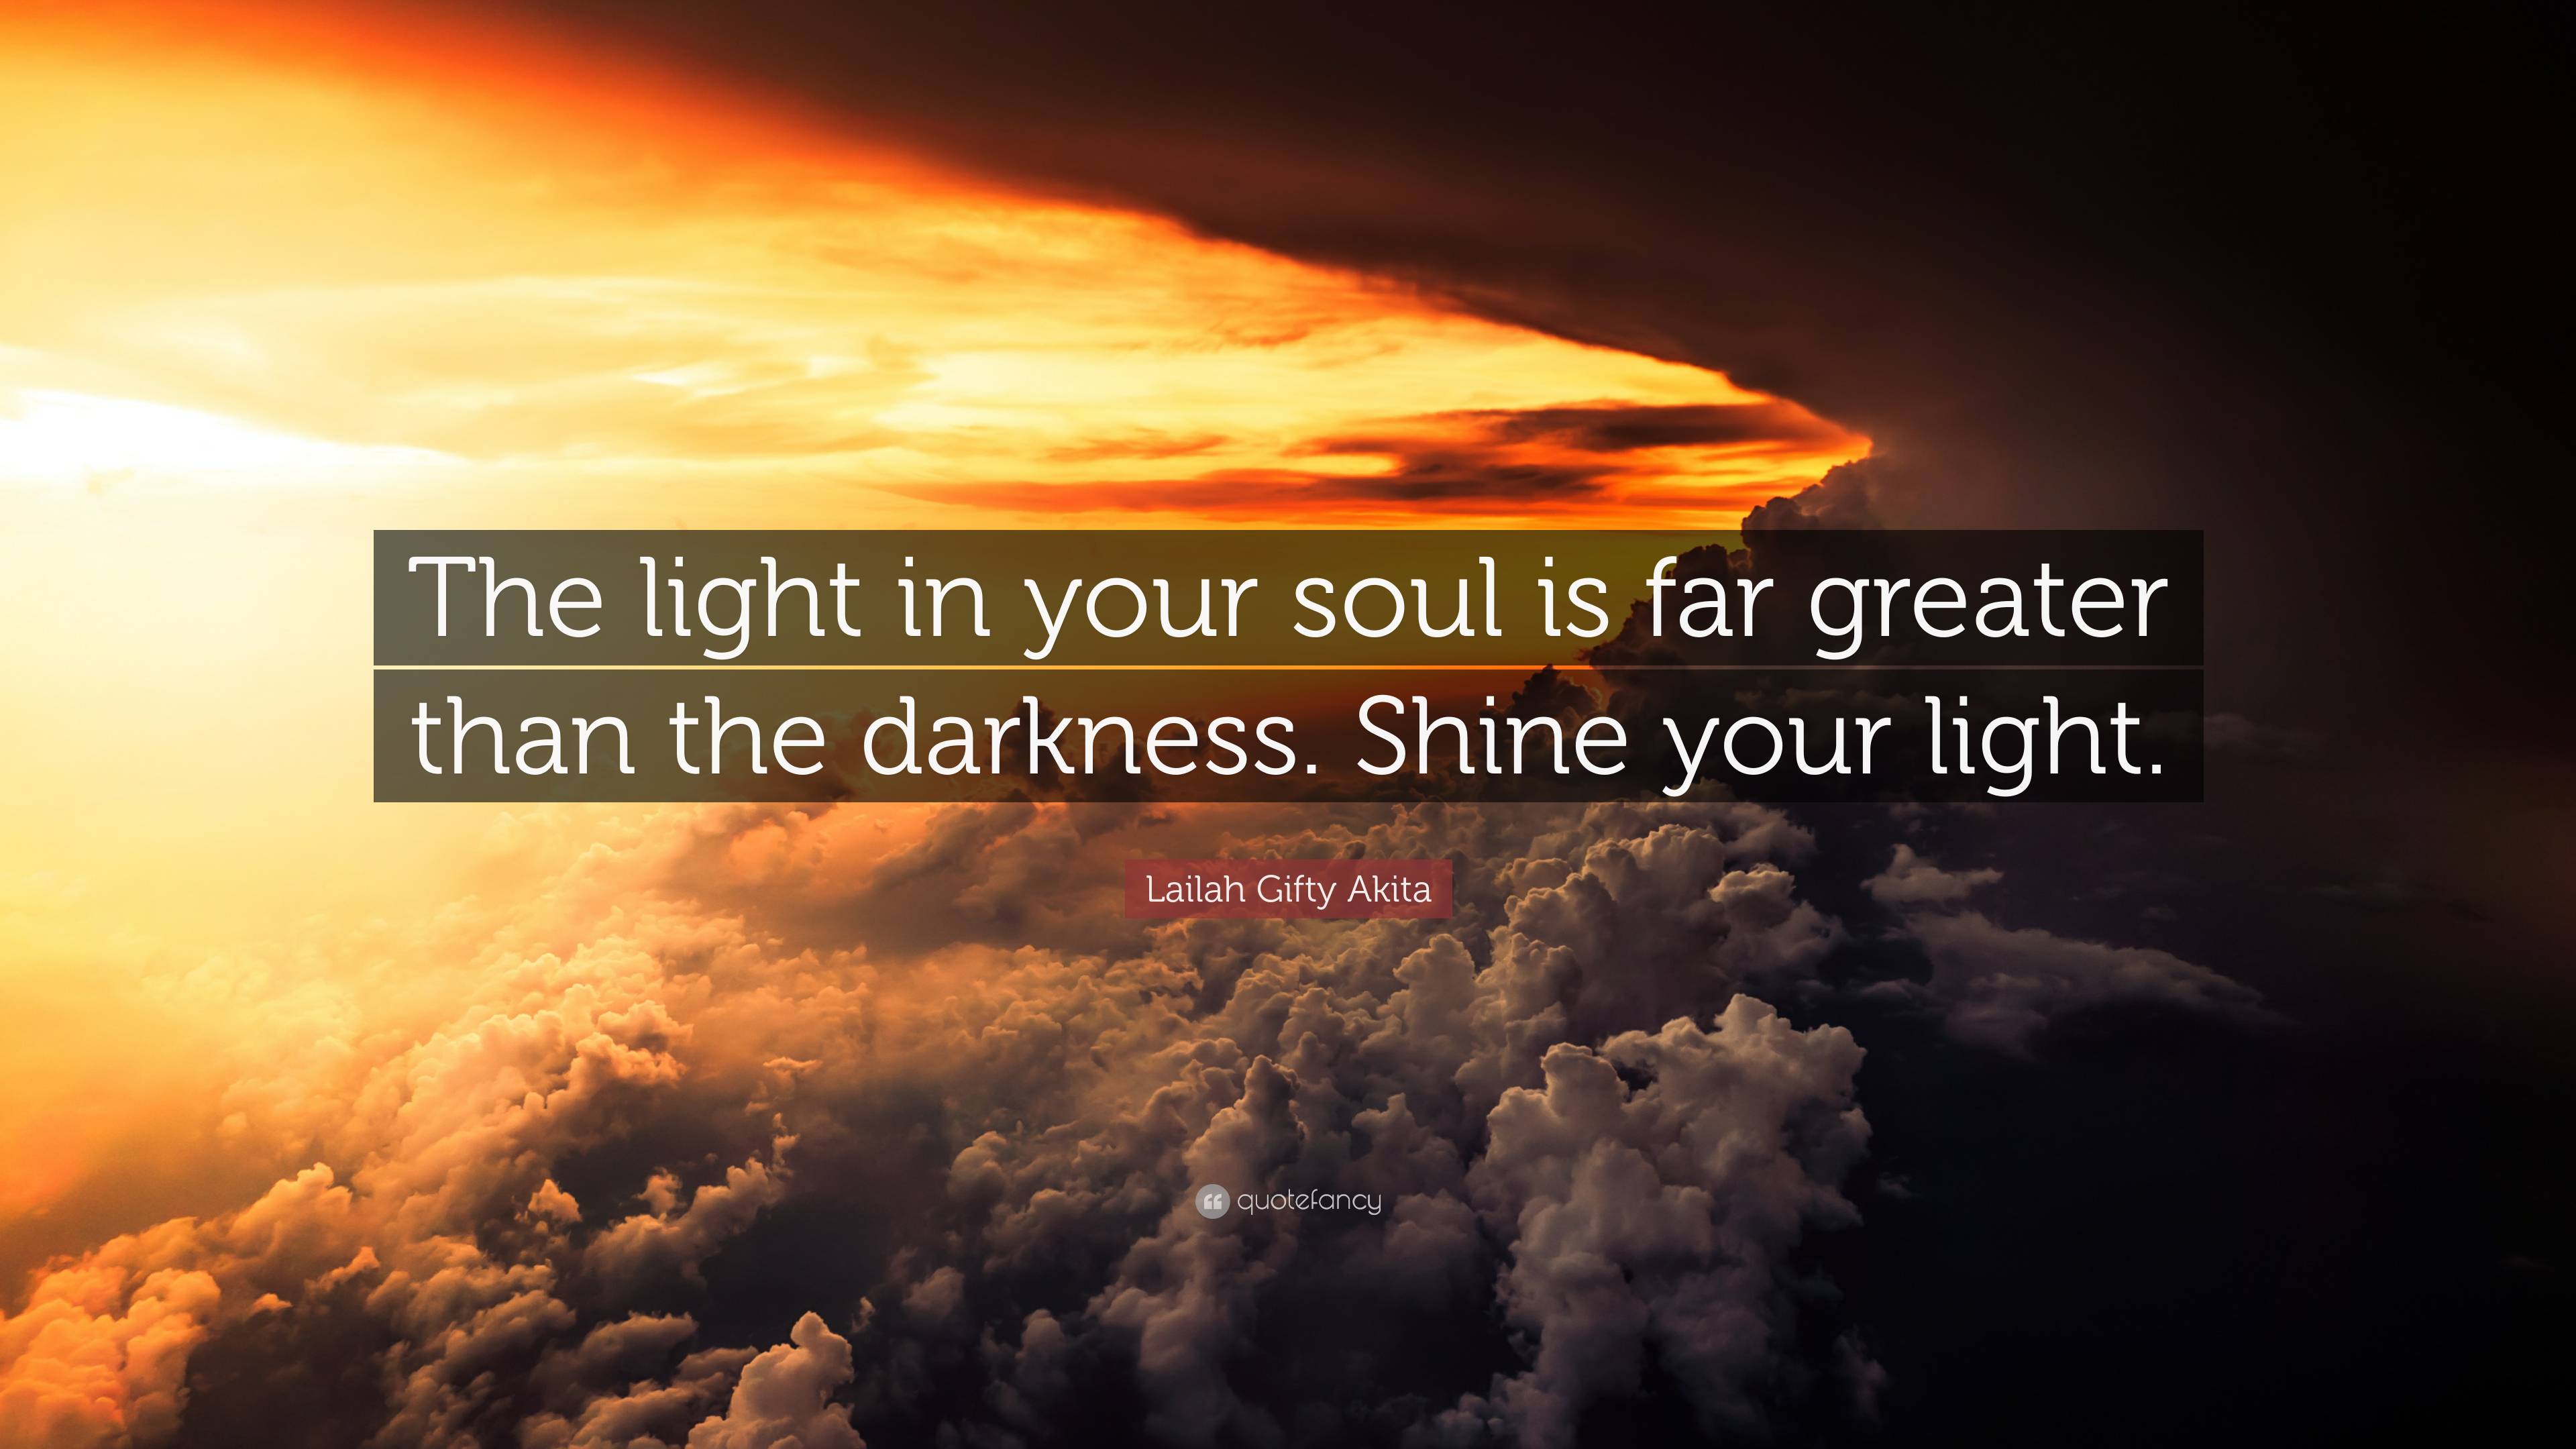 Lailah Gifty Akita Quote: “The light in your soul is far greater than ...